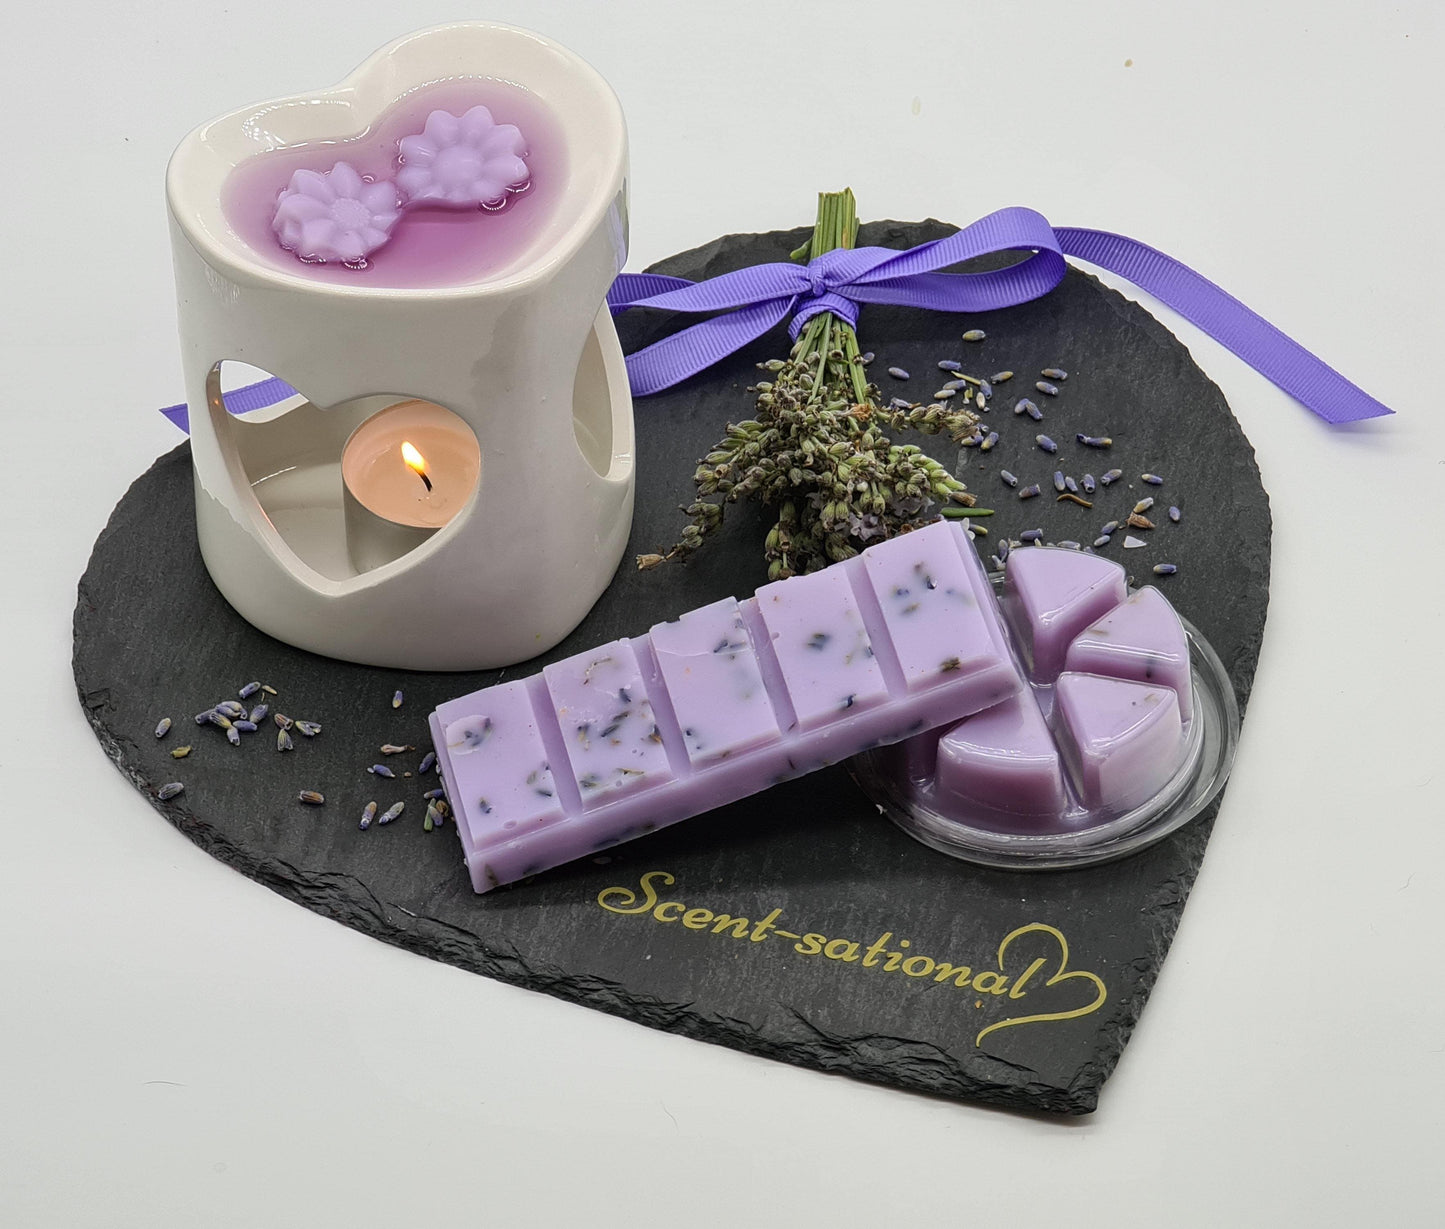 Lavender & Chamomile Wax Melts Scent Sational Wax melts